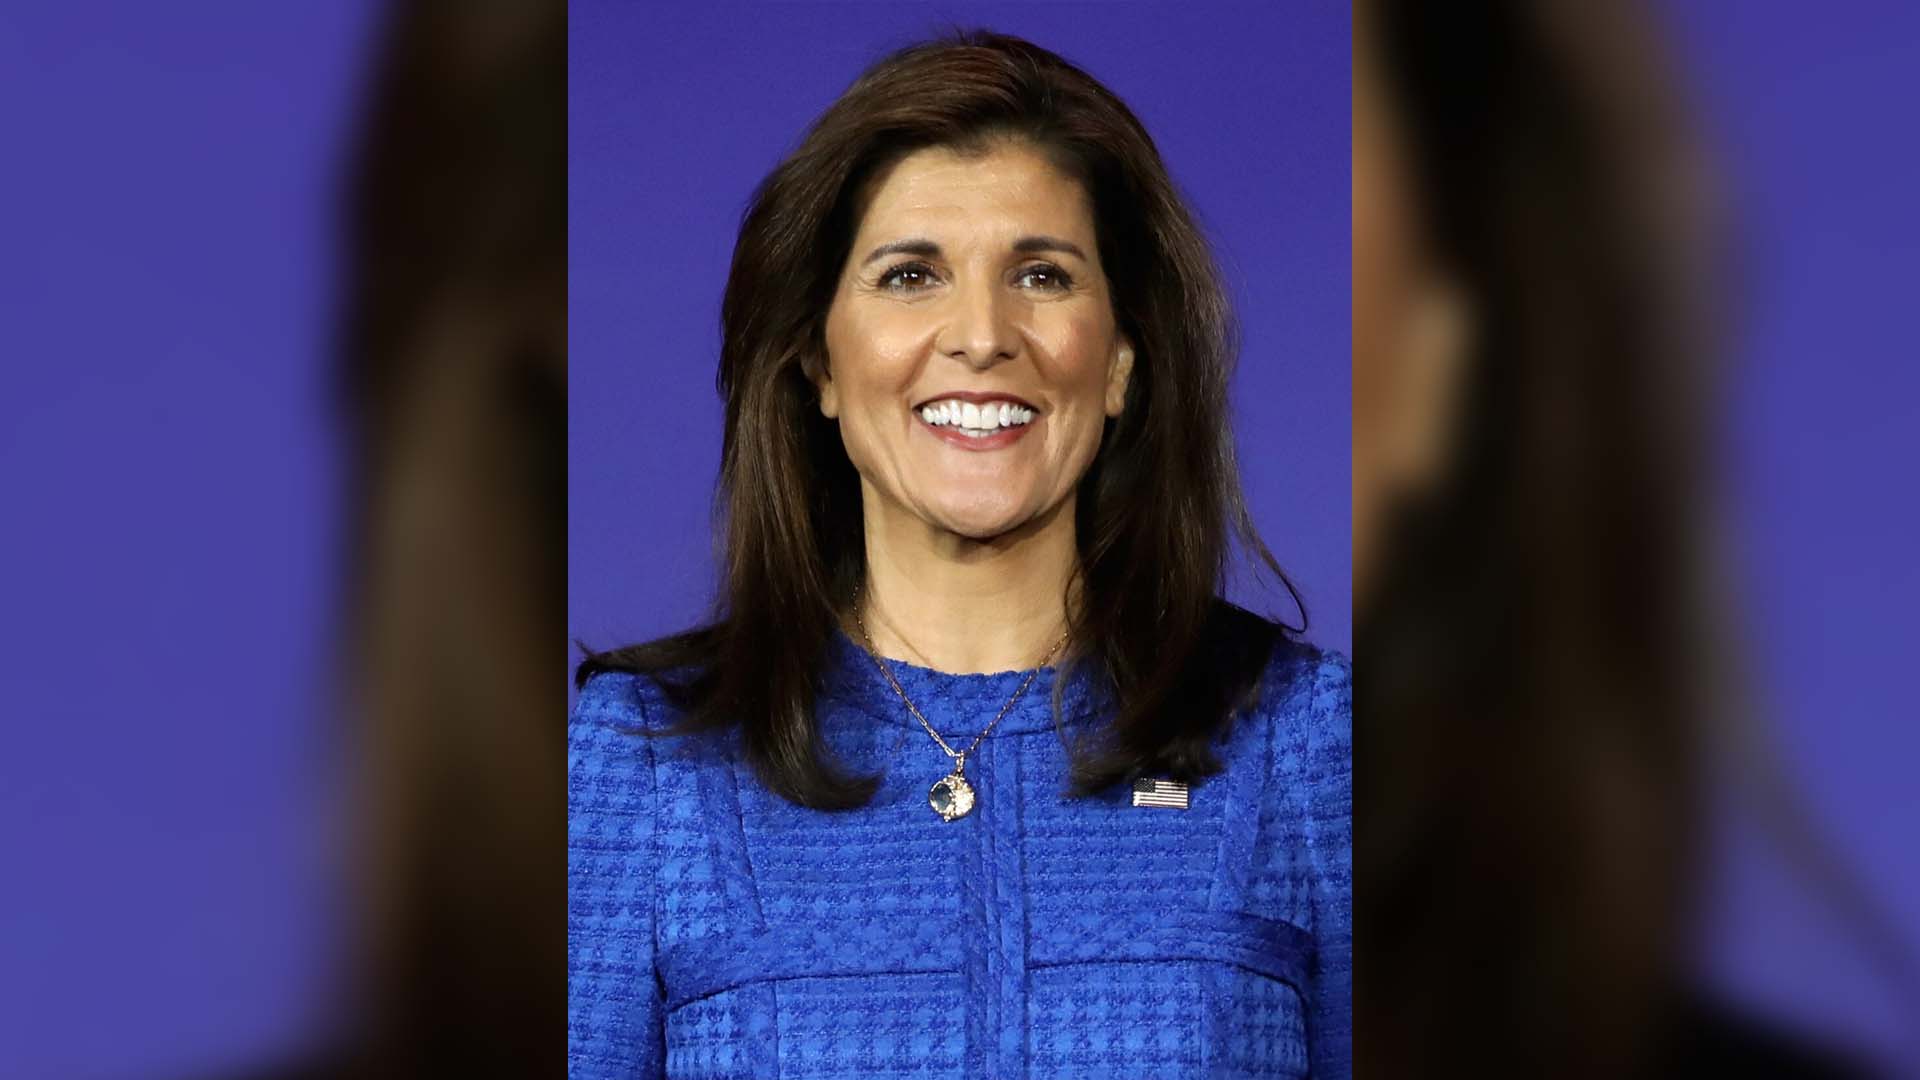 'Will You Marry Me?' Nikki Haley turns down proposal from Trump supporter